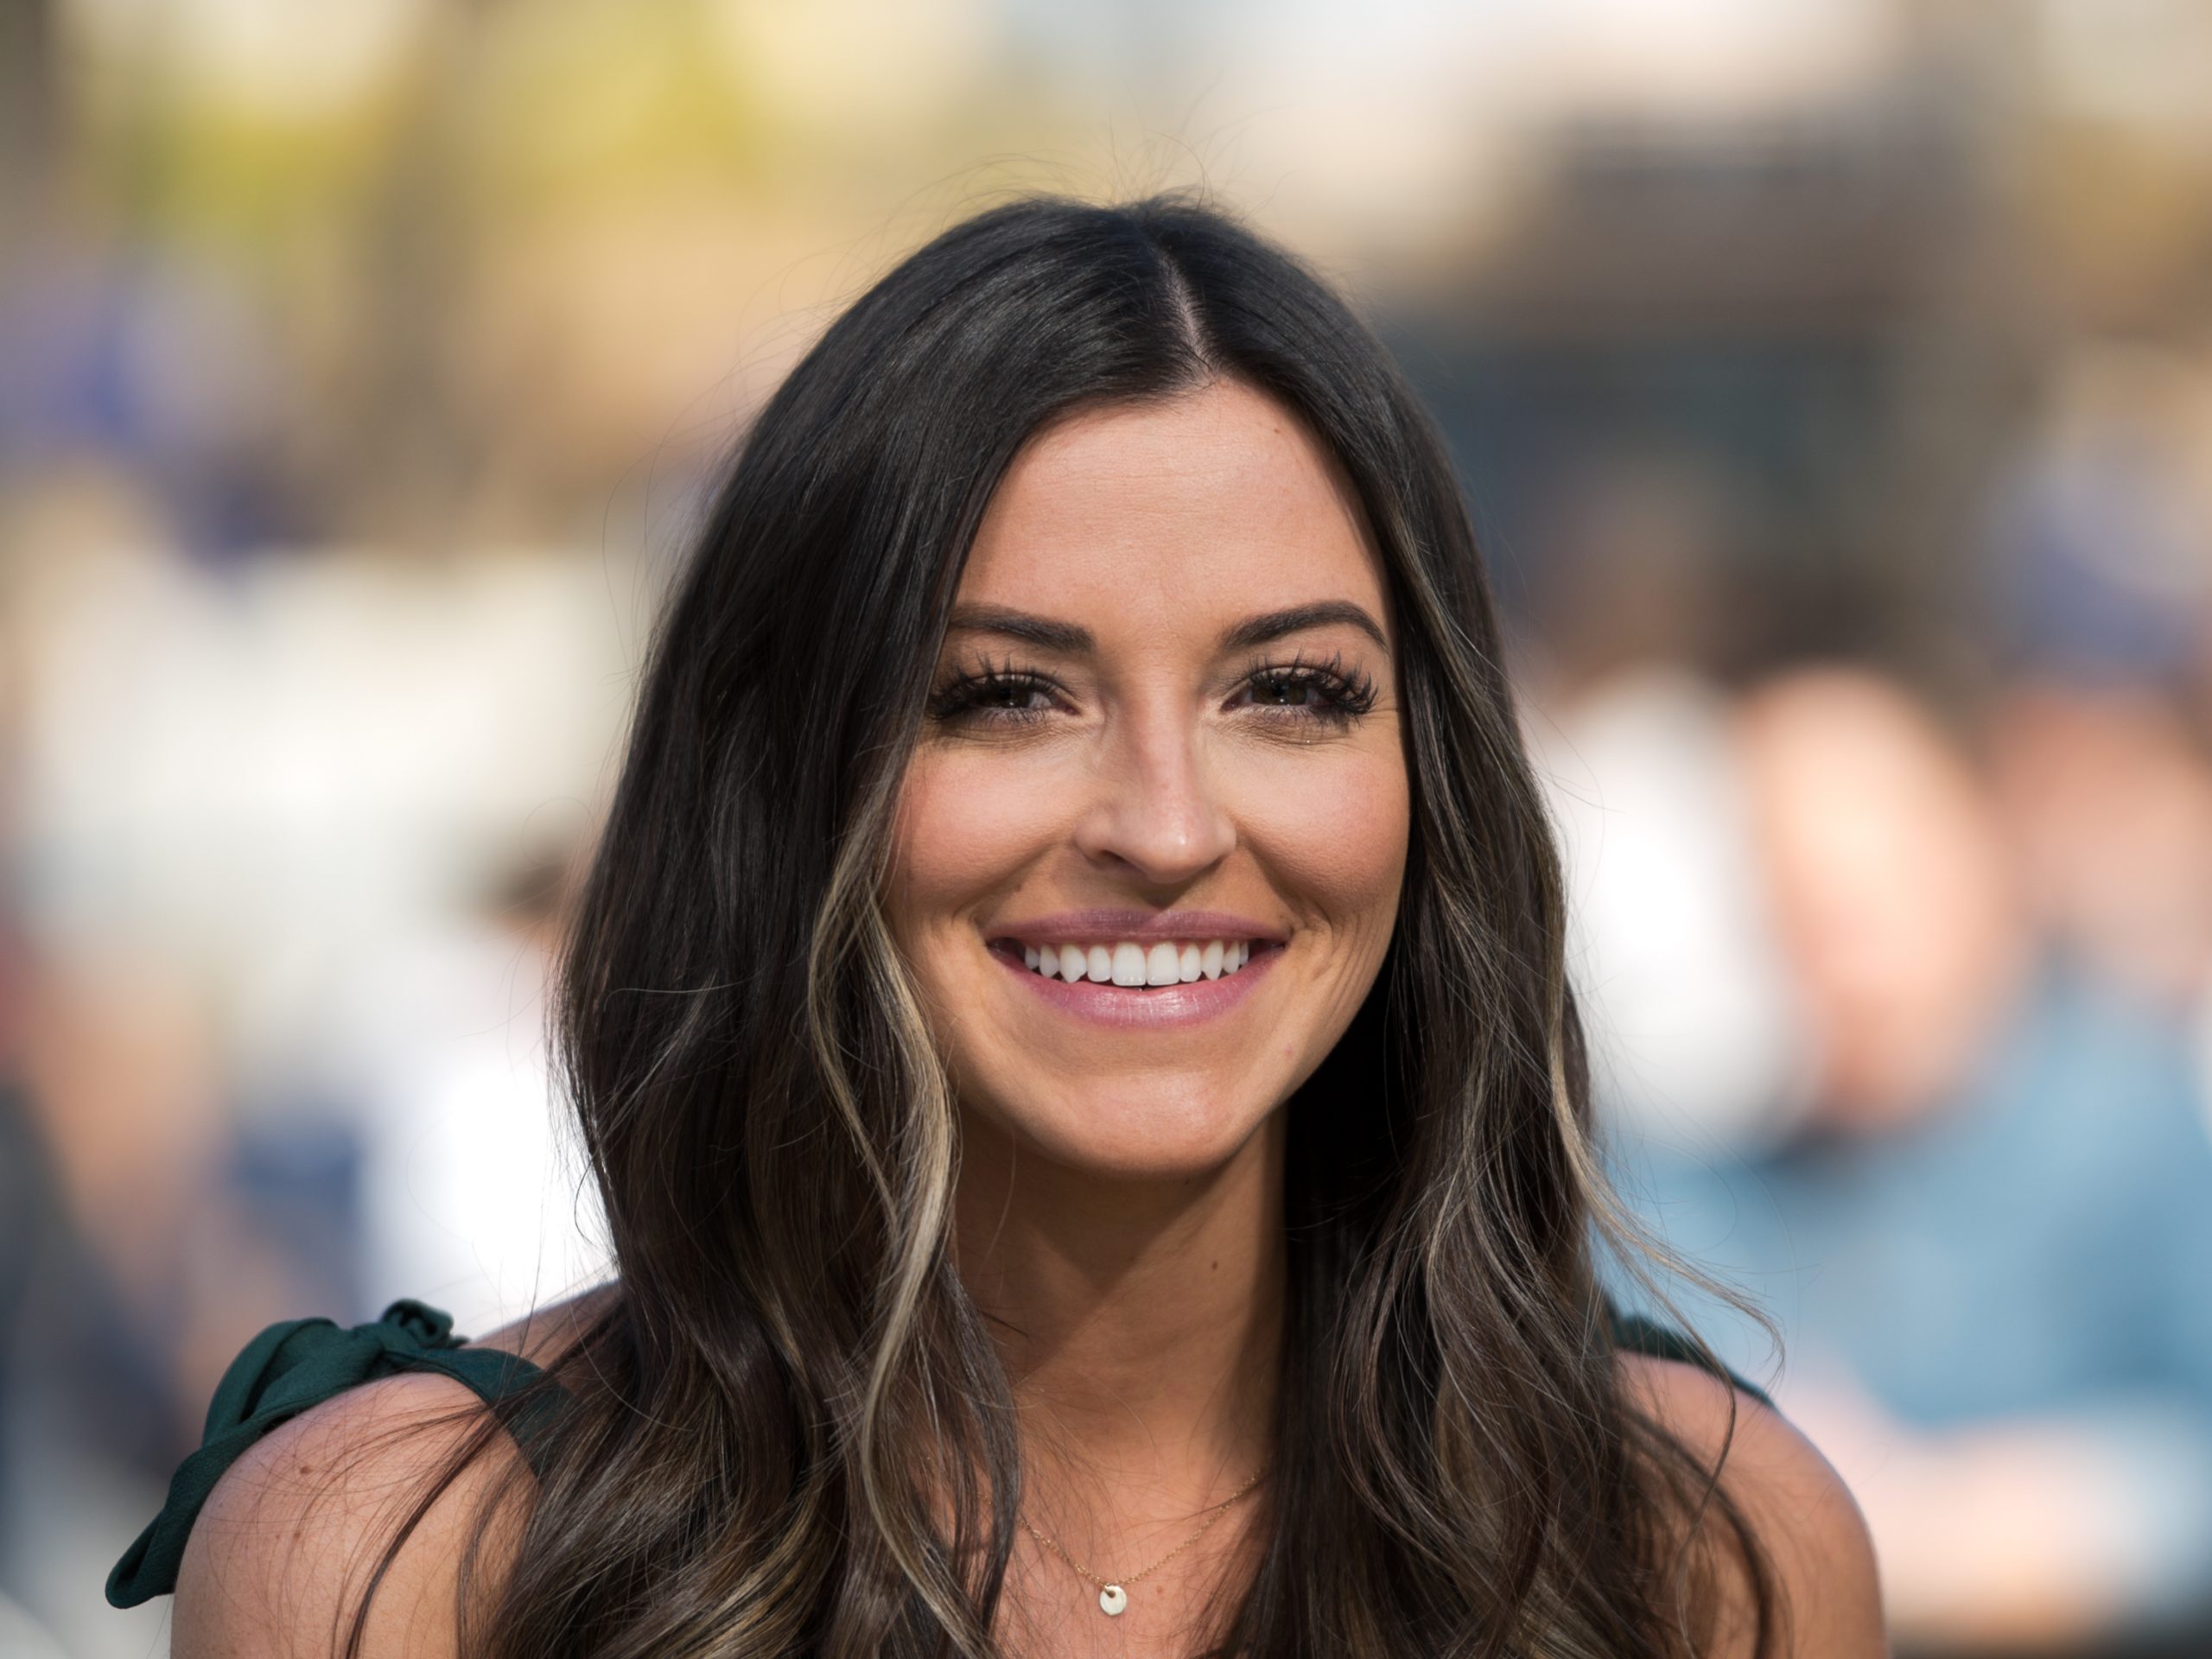 Tia Booth's Season 7 of Bachelor in Paradise Pick: So Who is Tia Booth?